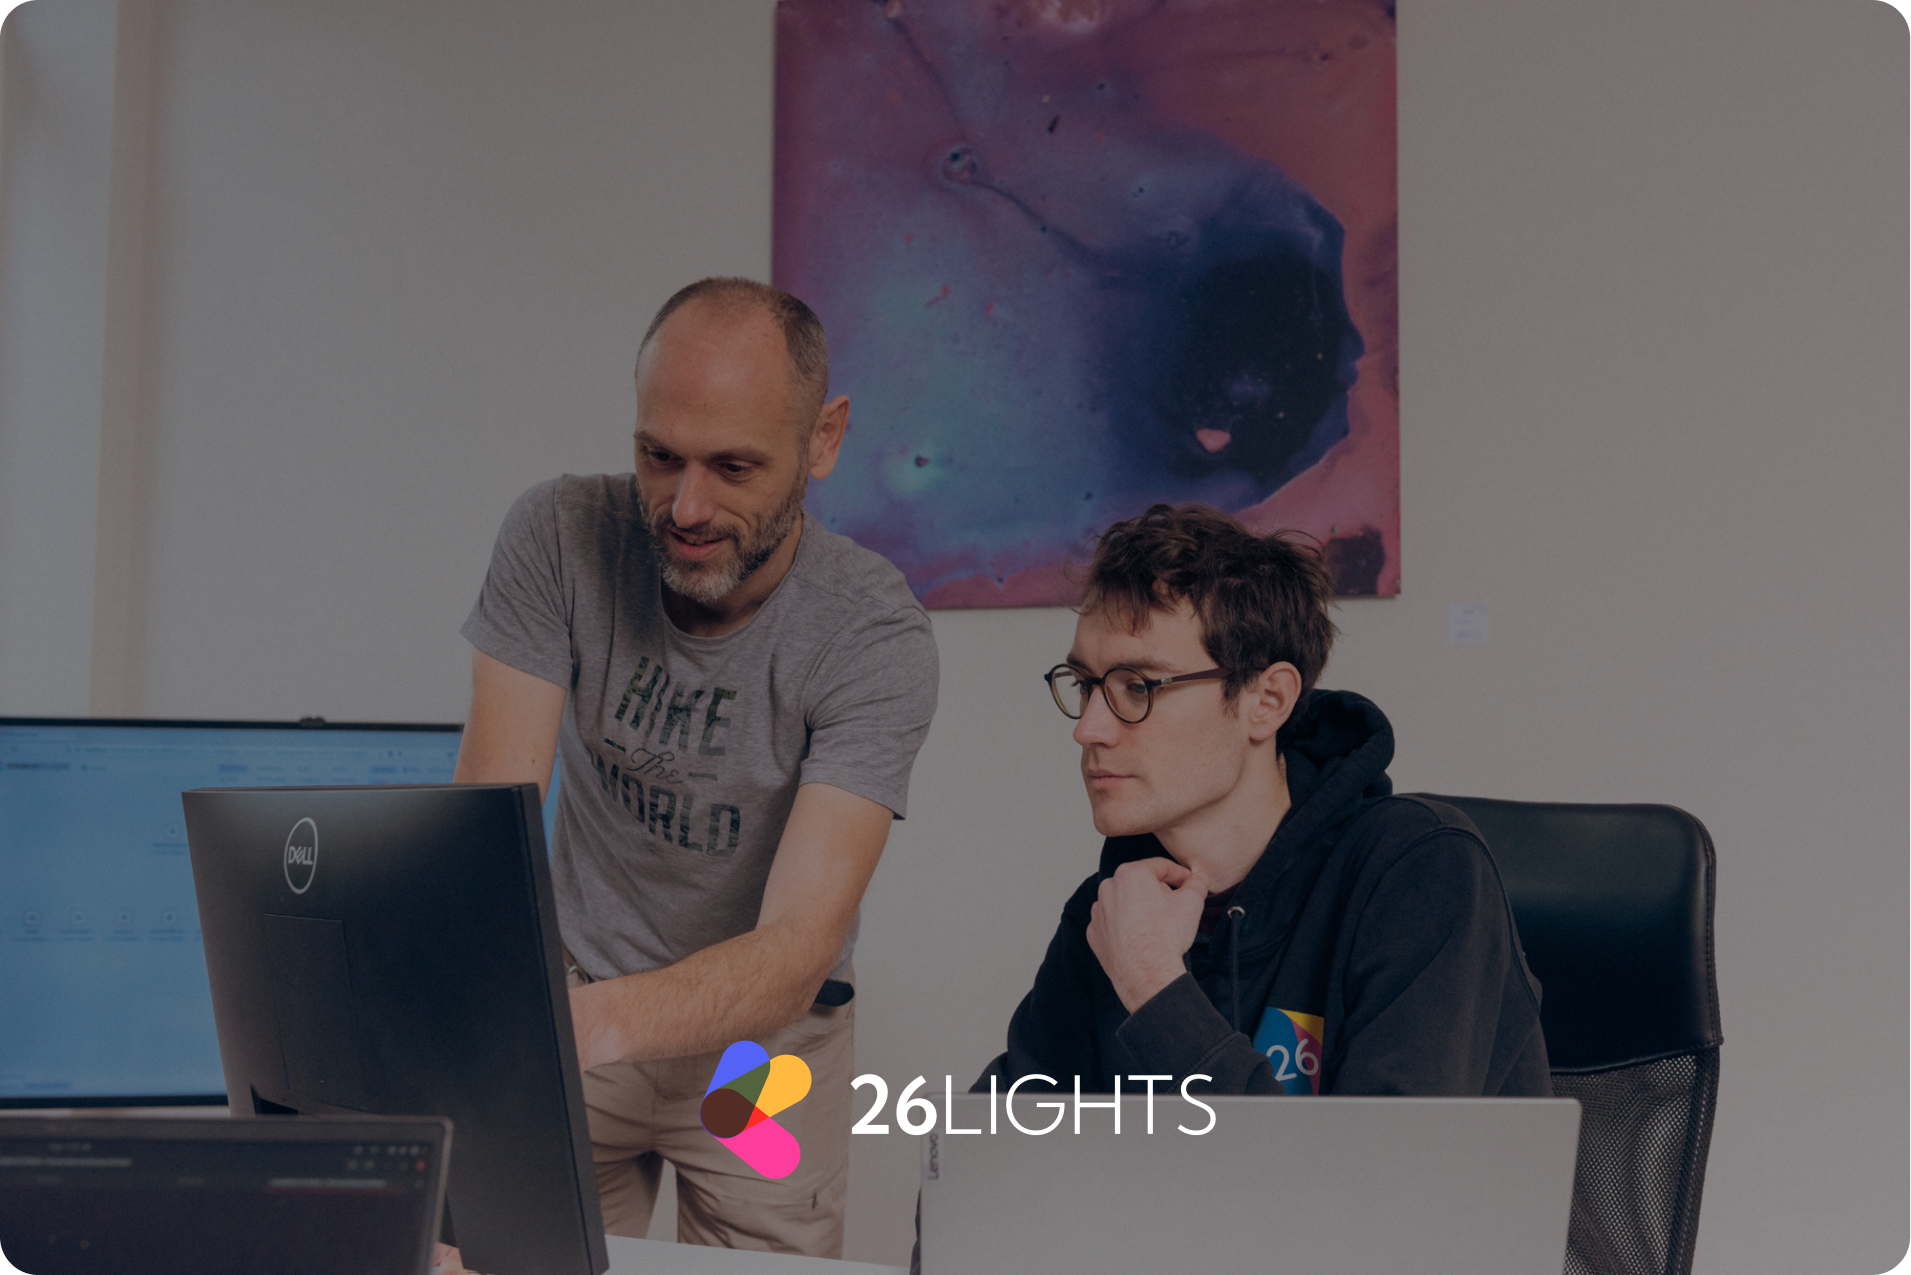 A picture of Olivier Samyn and Guillaume Dacier from 26lights.